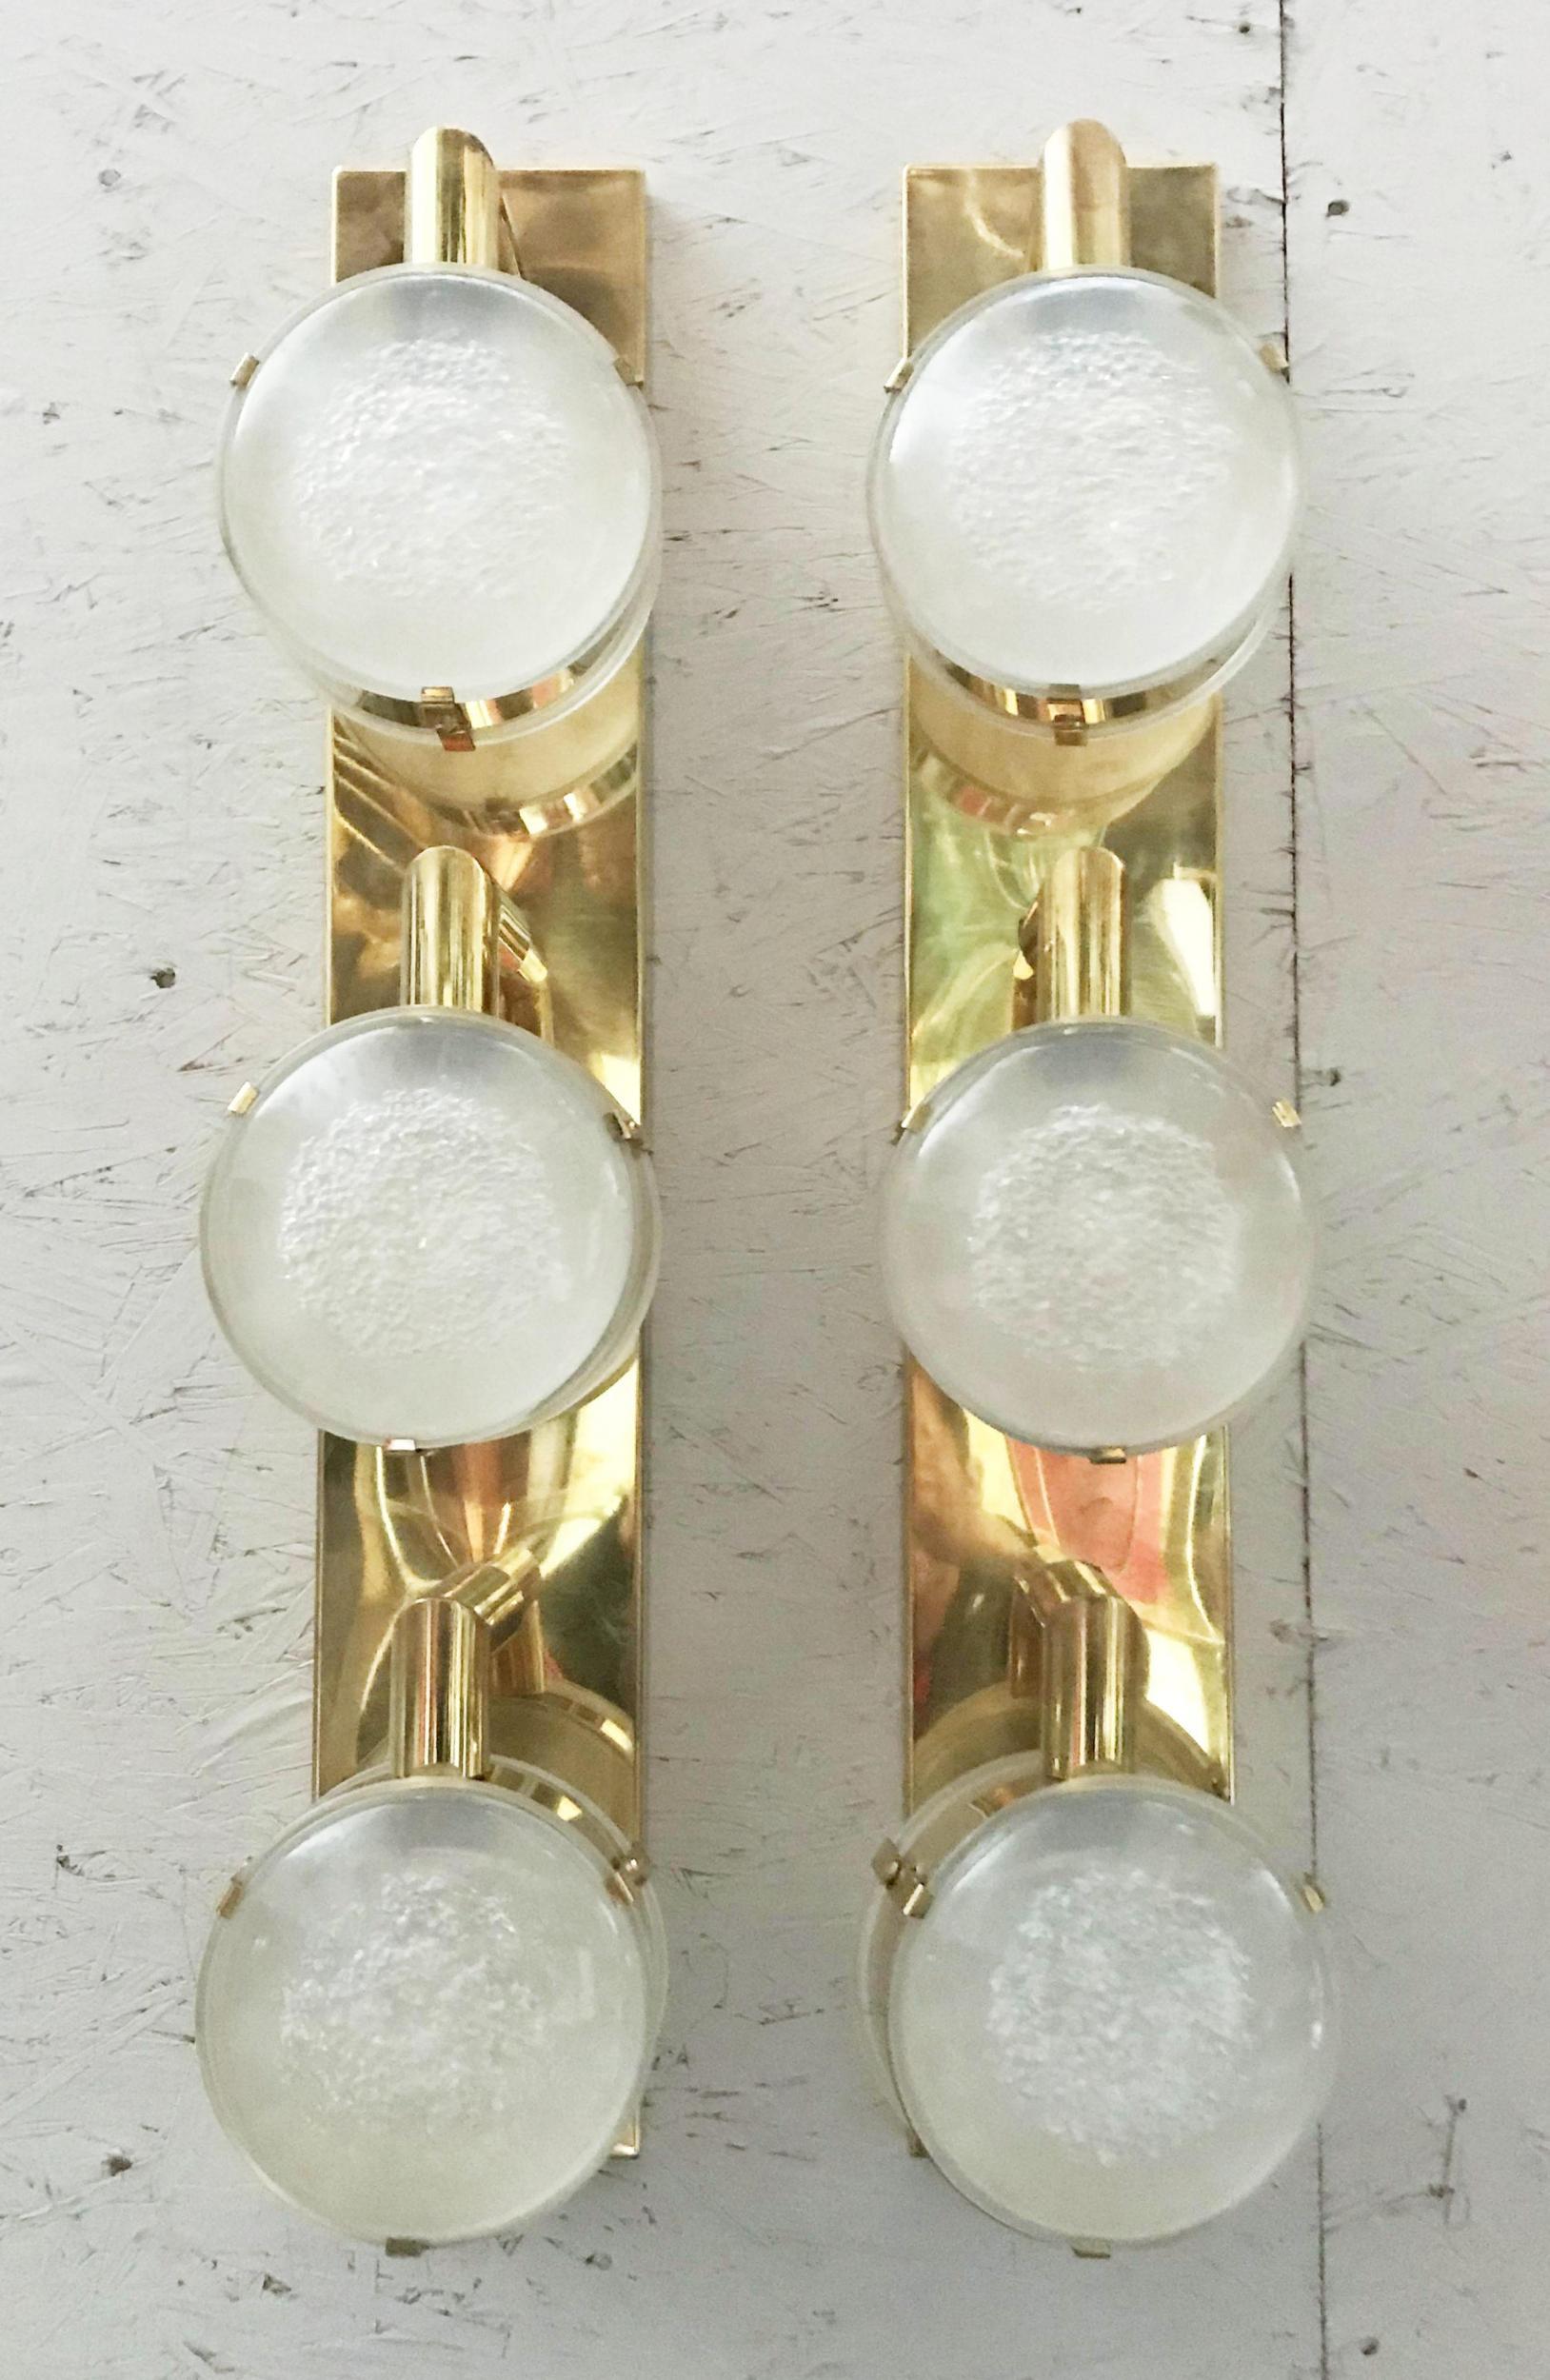 Italian Limited Edition Pair of Murano Frosted Glass Sconces, c 1990s